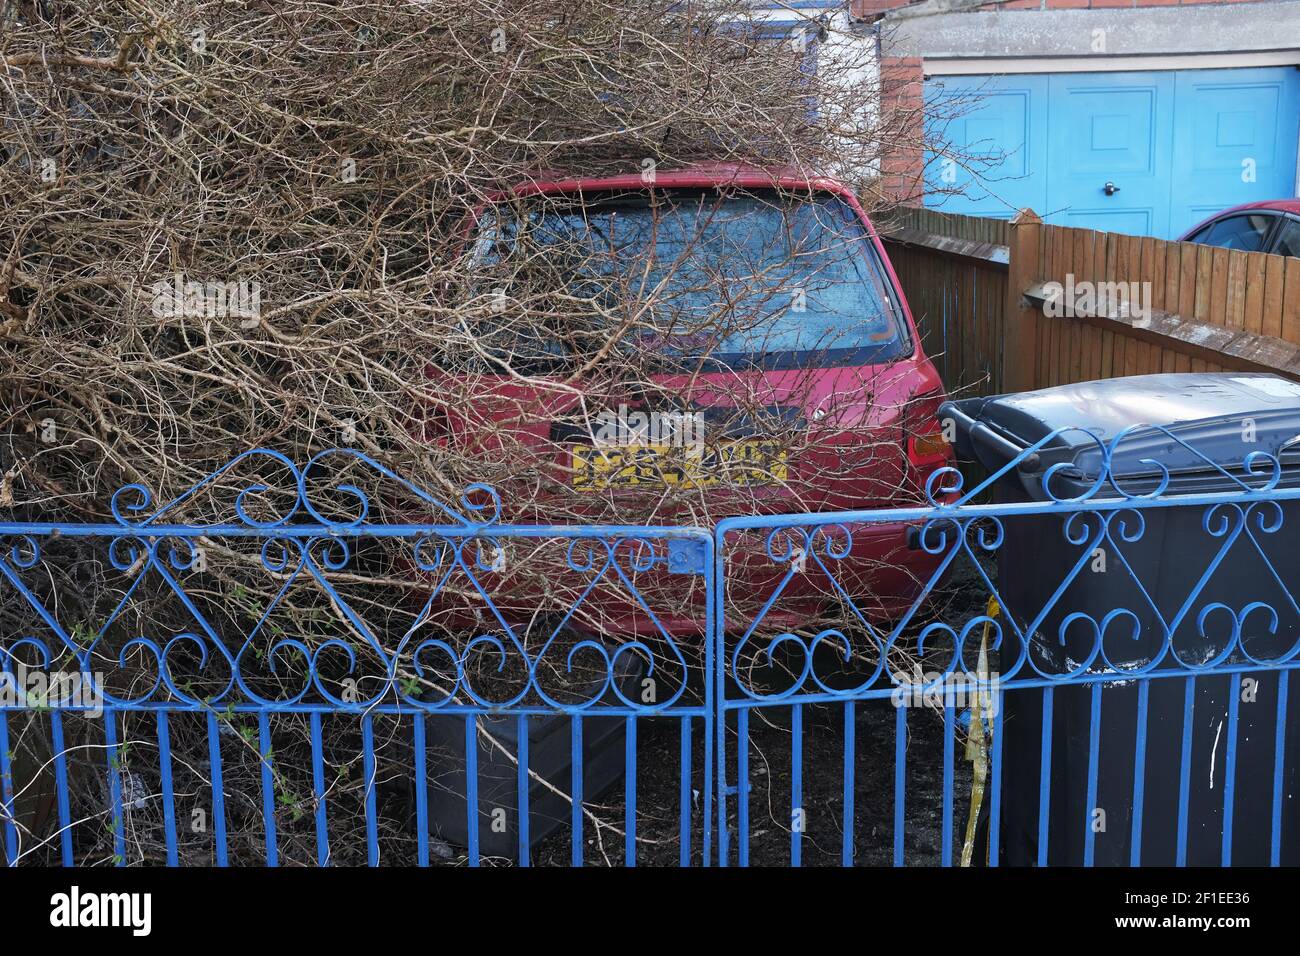 An abandoned car in a front garden. Stock Photo